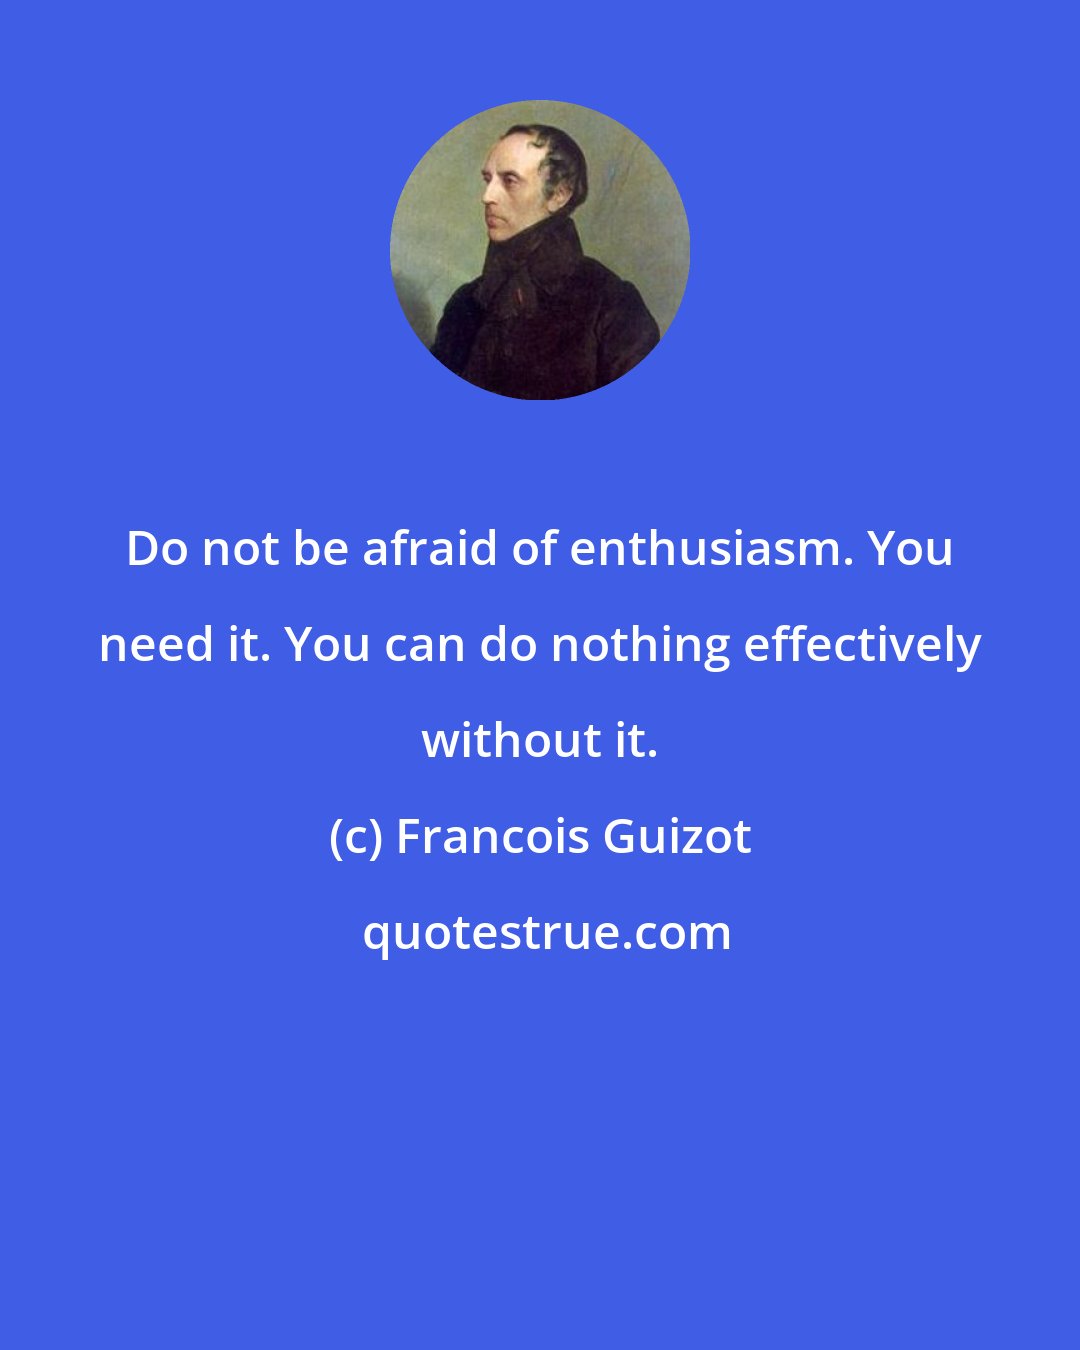 Francois Guizot: Do not be afraid of enthusiasm. You need it. You can do nothing effectively without it.